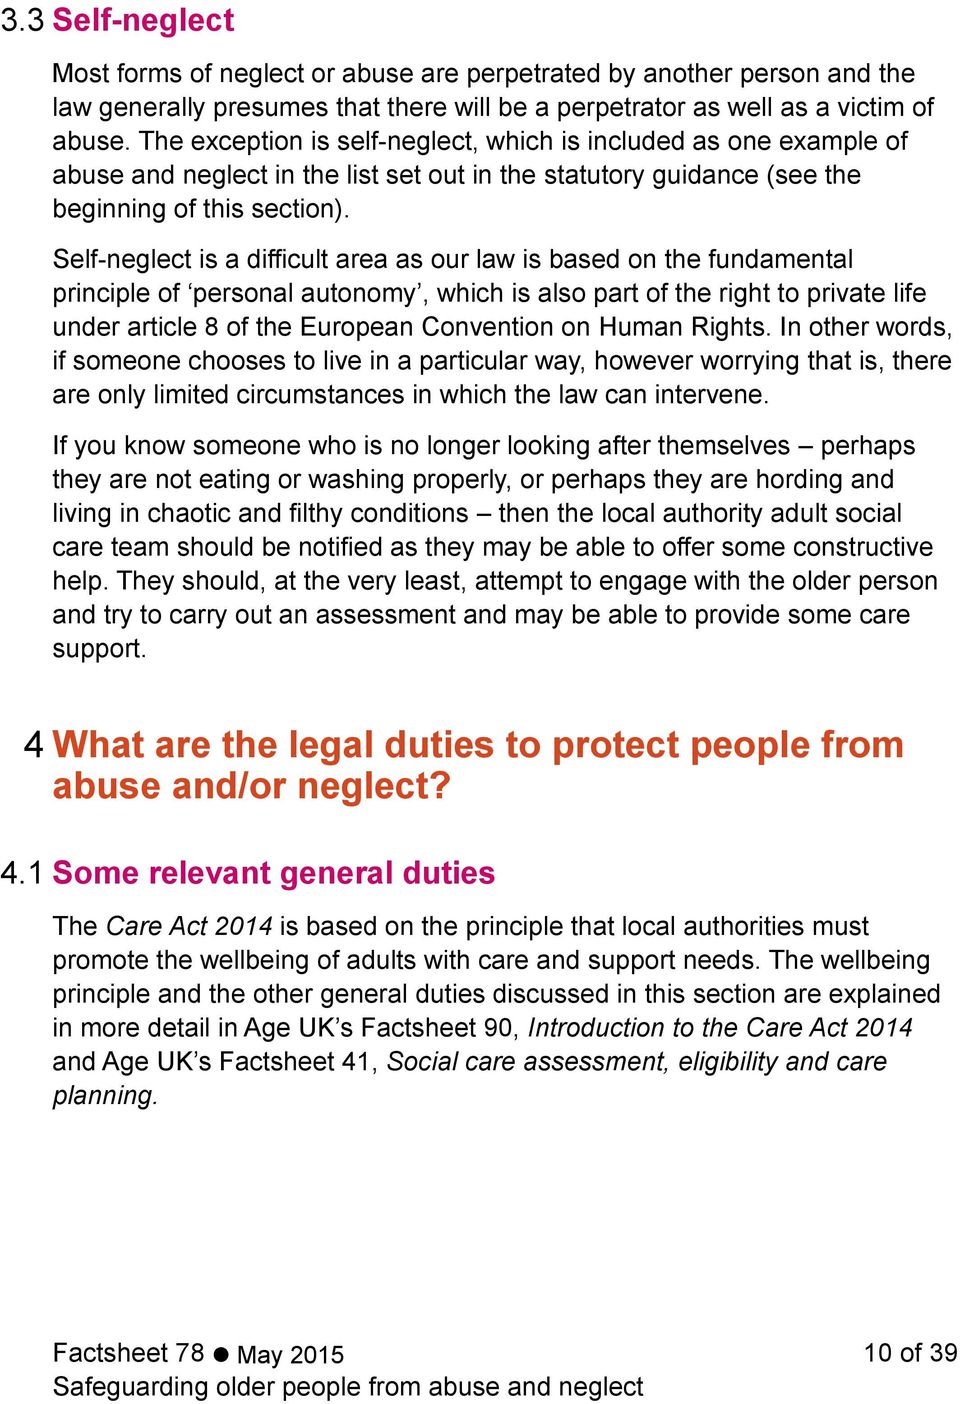 Self-neglect is a difficult area as our law is based on the fundamental principle of personal autonomy, which is also part of the right to private life under article 8 of the European Convention on